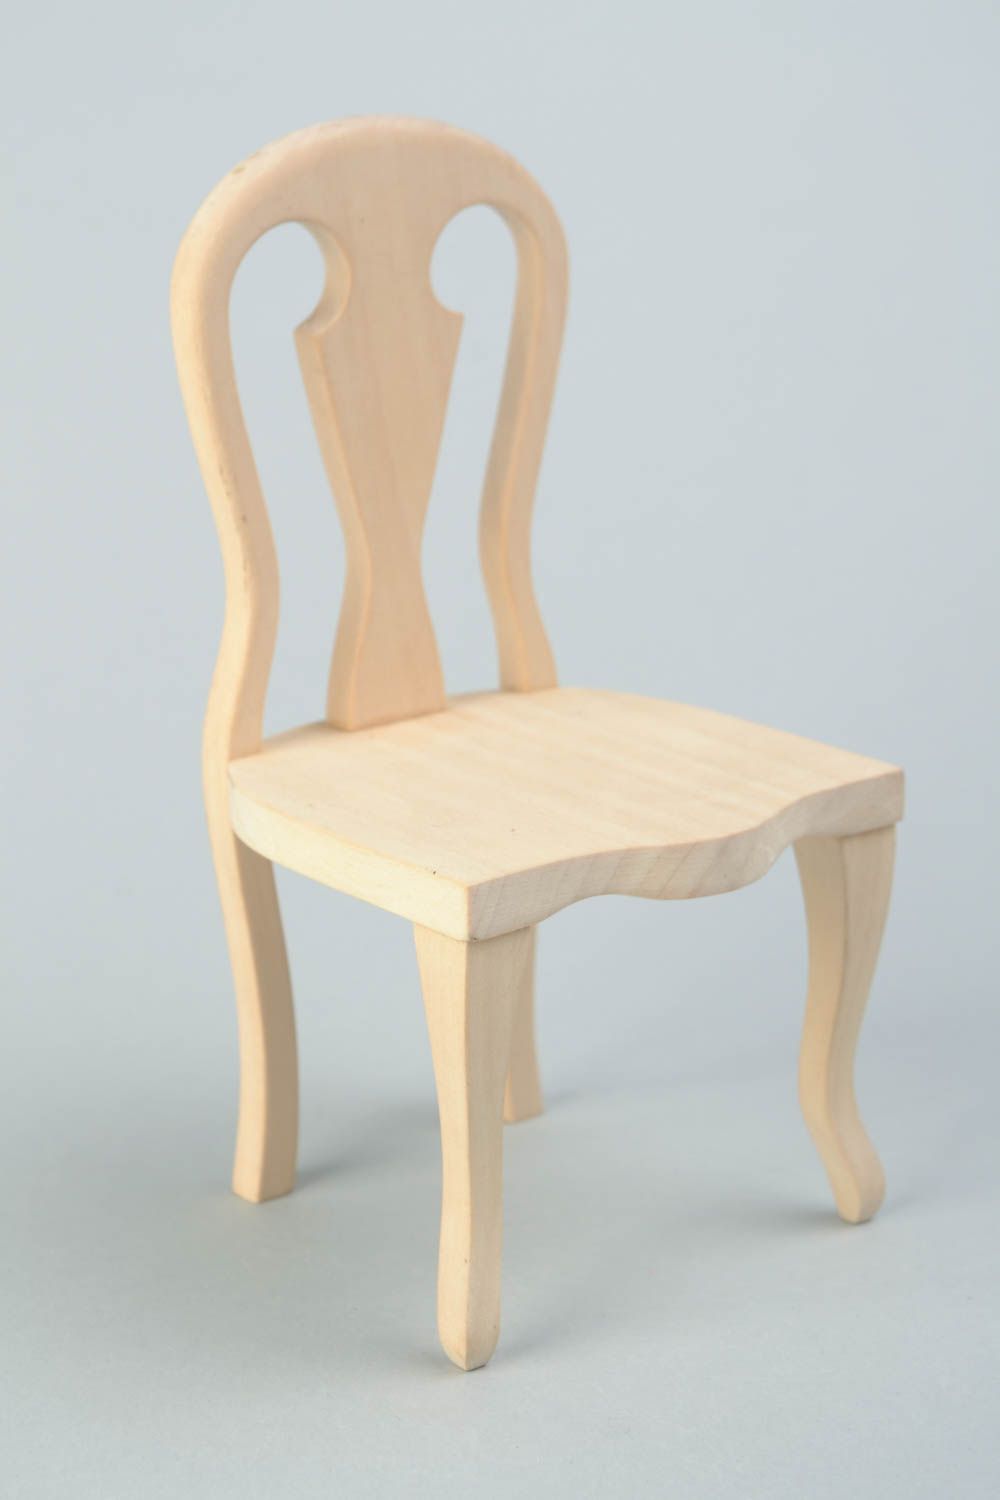 Handmade unfinished wooden doll furniture chair craft blank for creative work photo 3